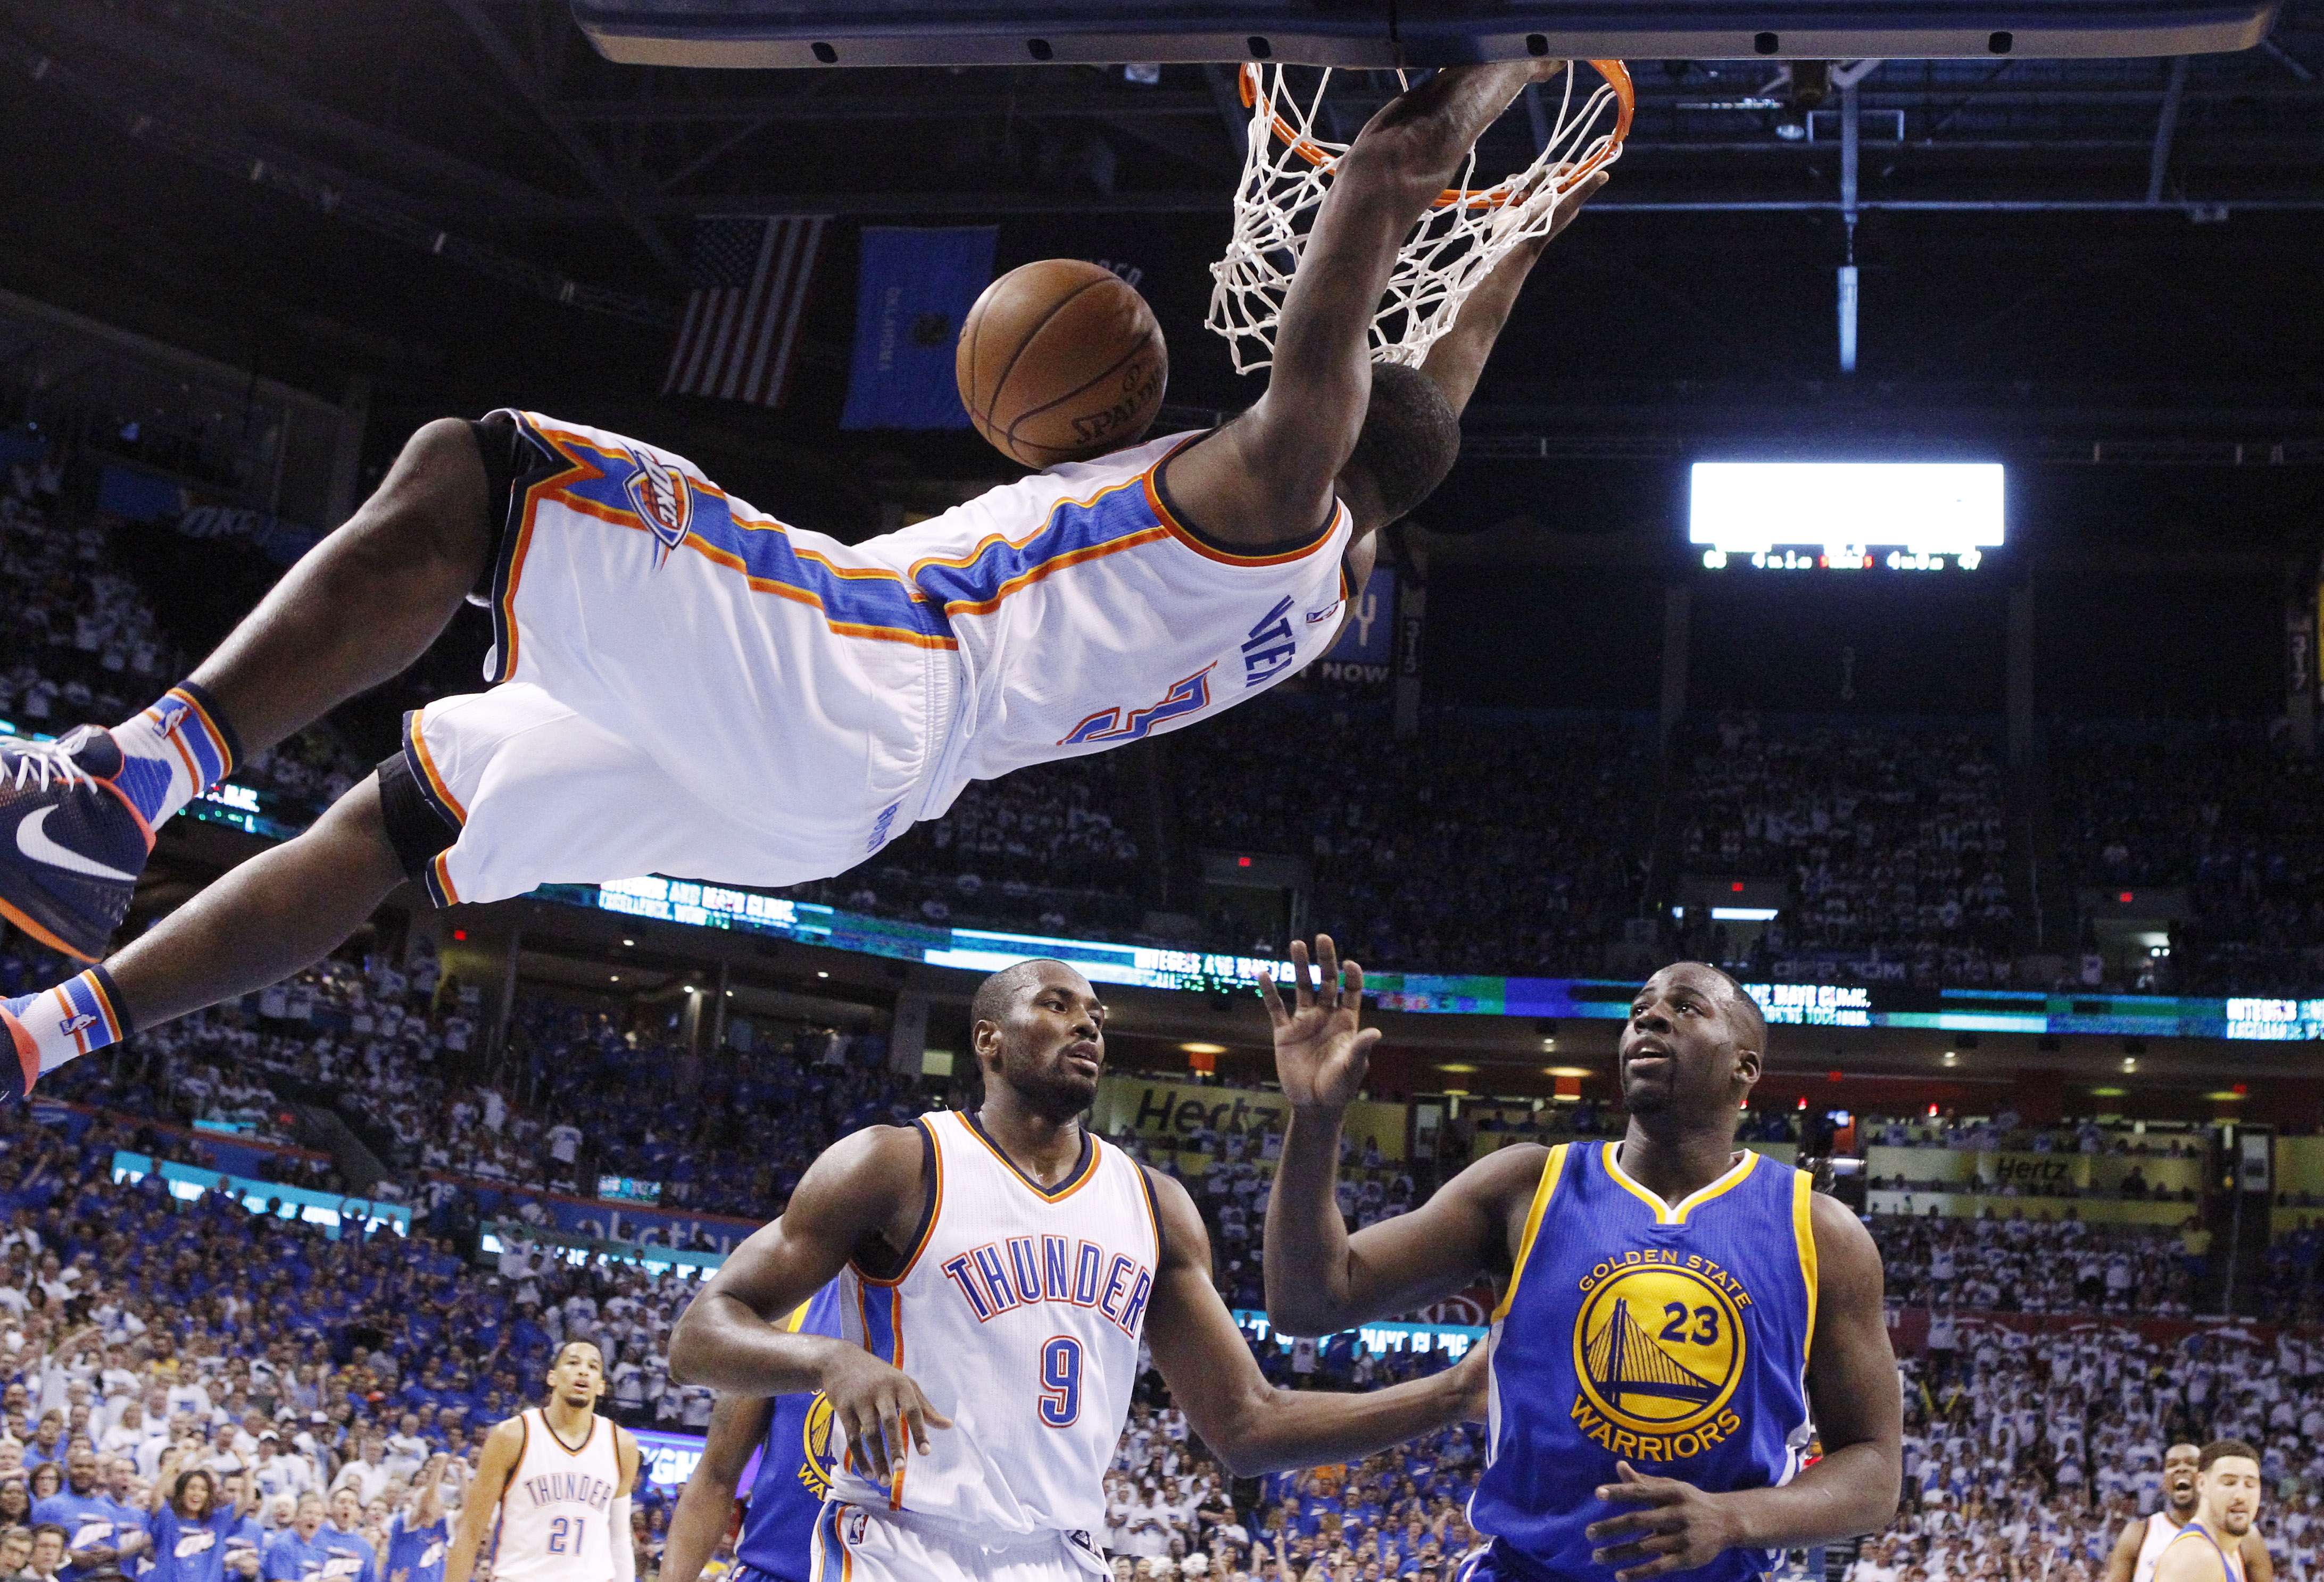 Oklahoma City Thunder guard Dion Waiters dunks against the Golden State Warriors during the first half of game three. Photo: AP